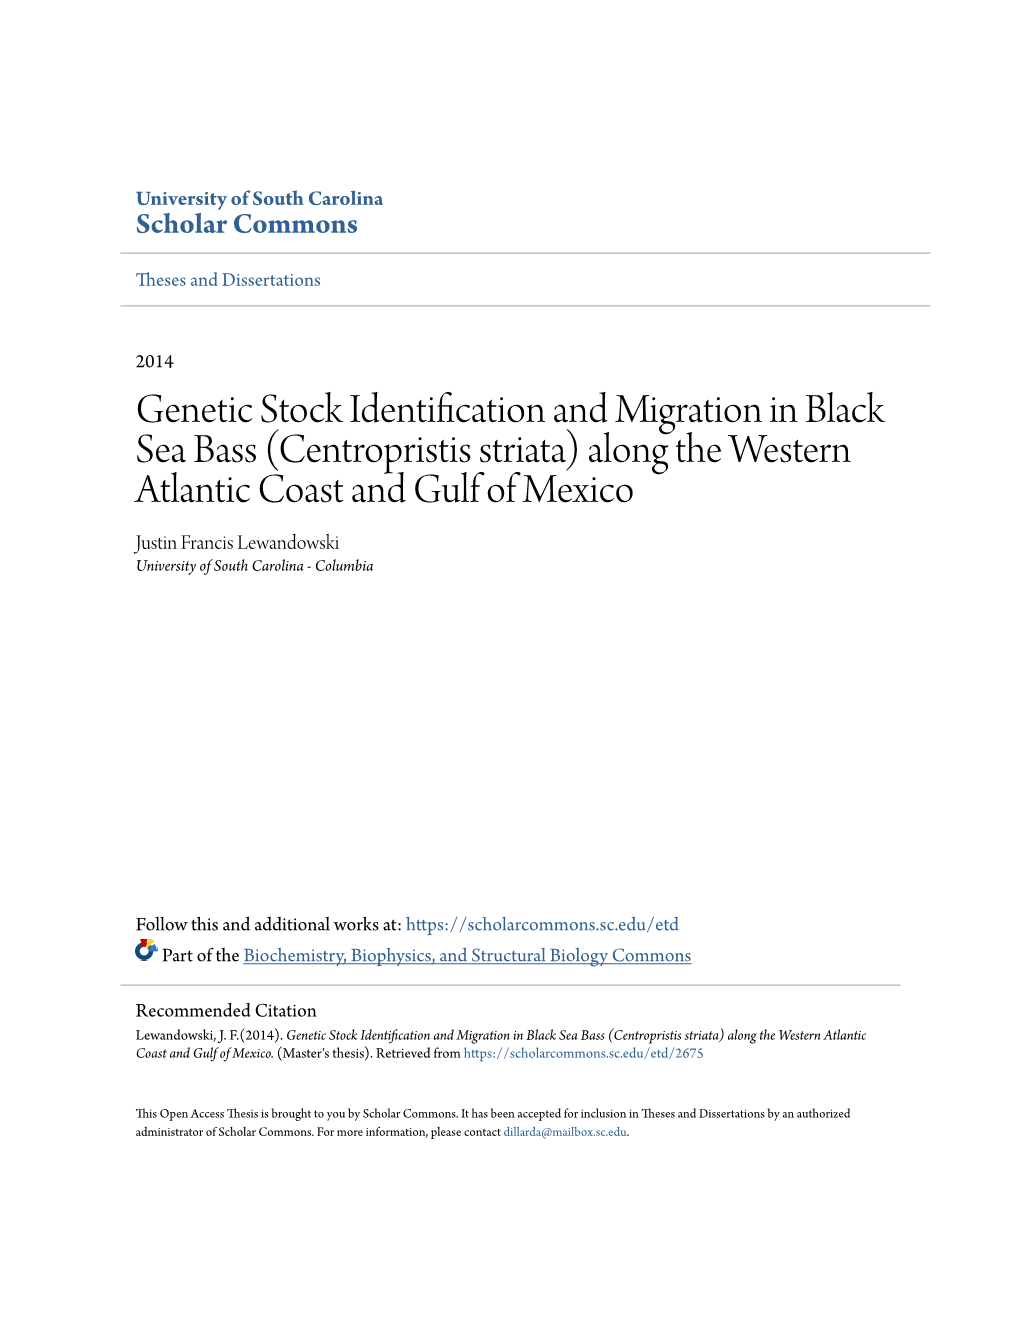 Genetic Stock Identification and Migration In